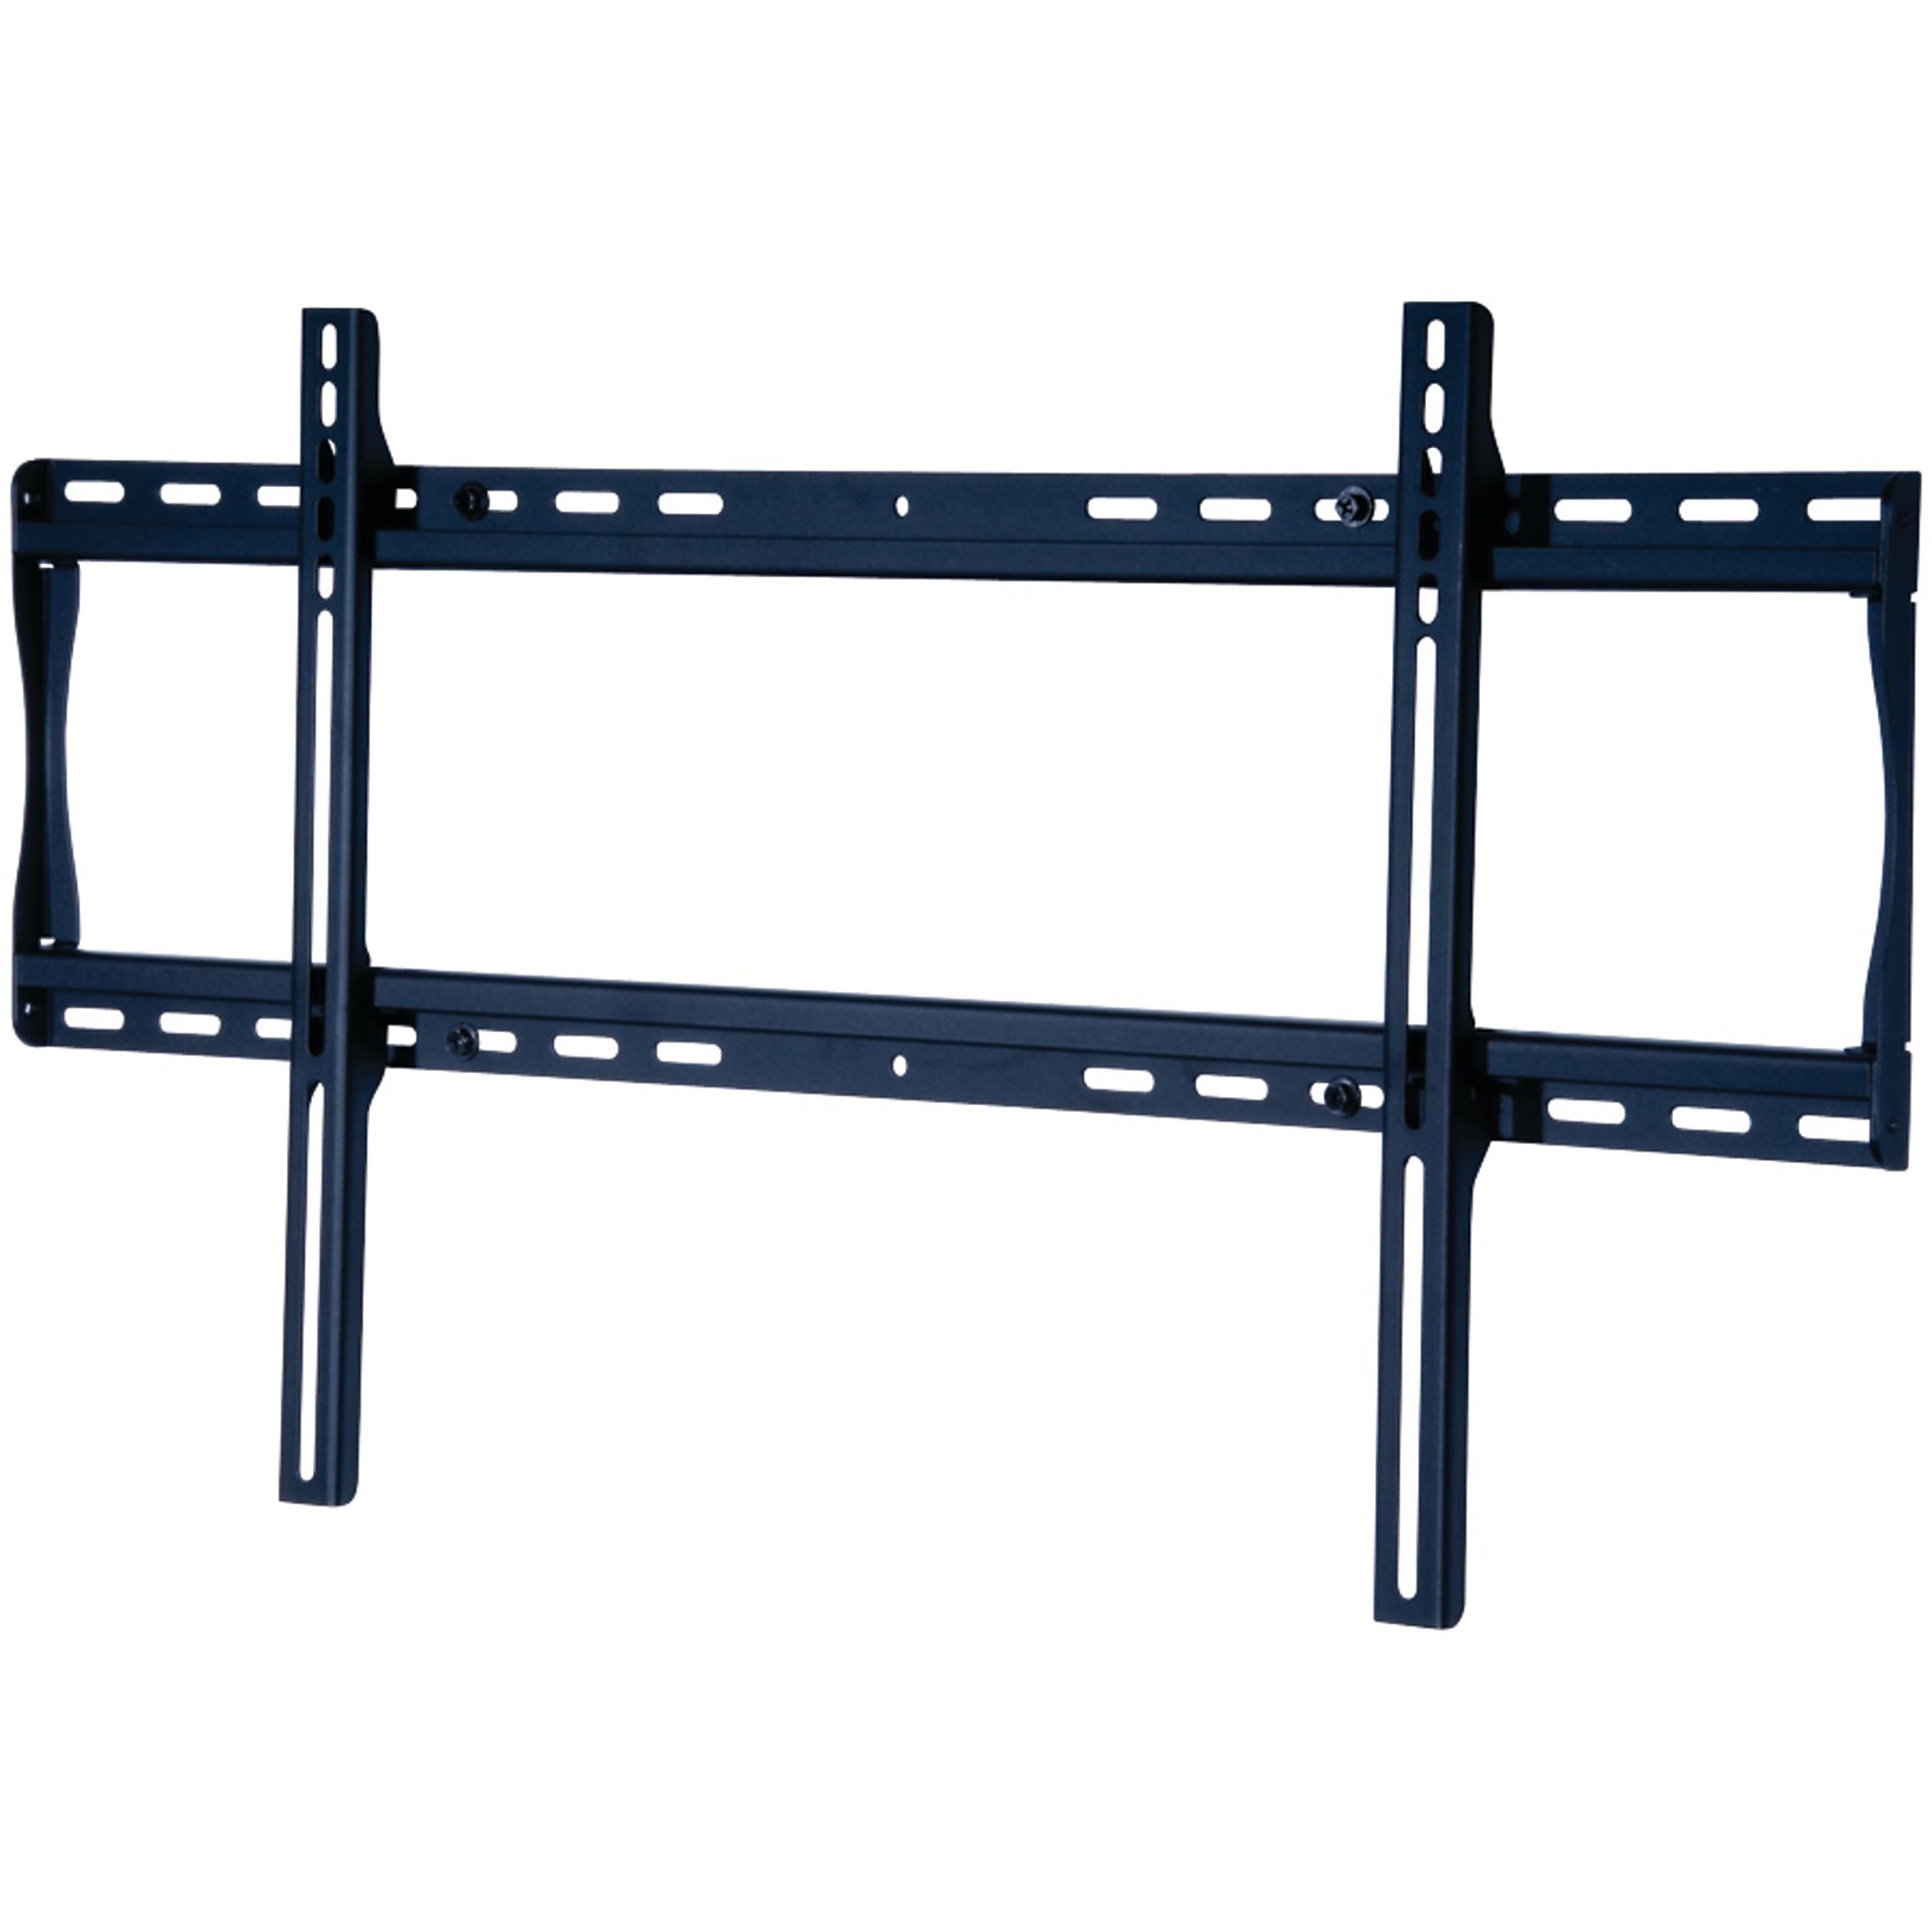 Peerless SmartMount , Universal 39Inch to 80Inch Flat Panel Wall Mount, Capacity 200 lb, Material Steel, Color Finish Black, Model SF660P